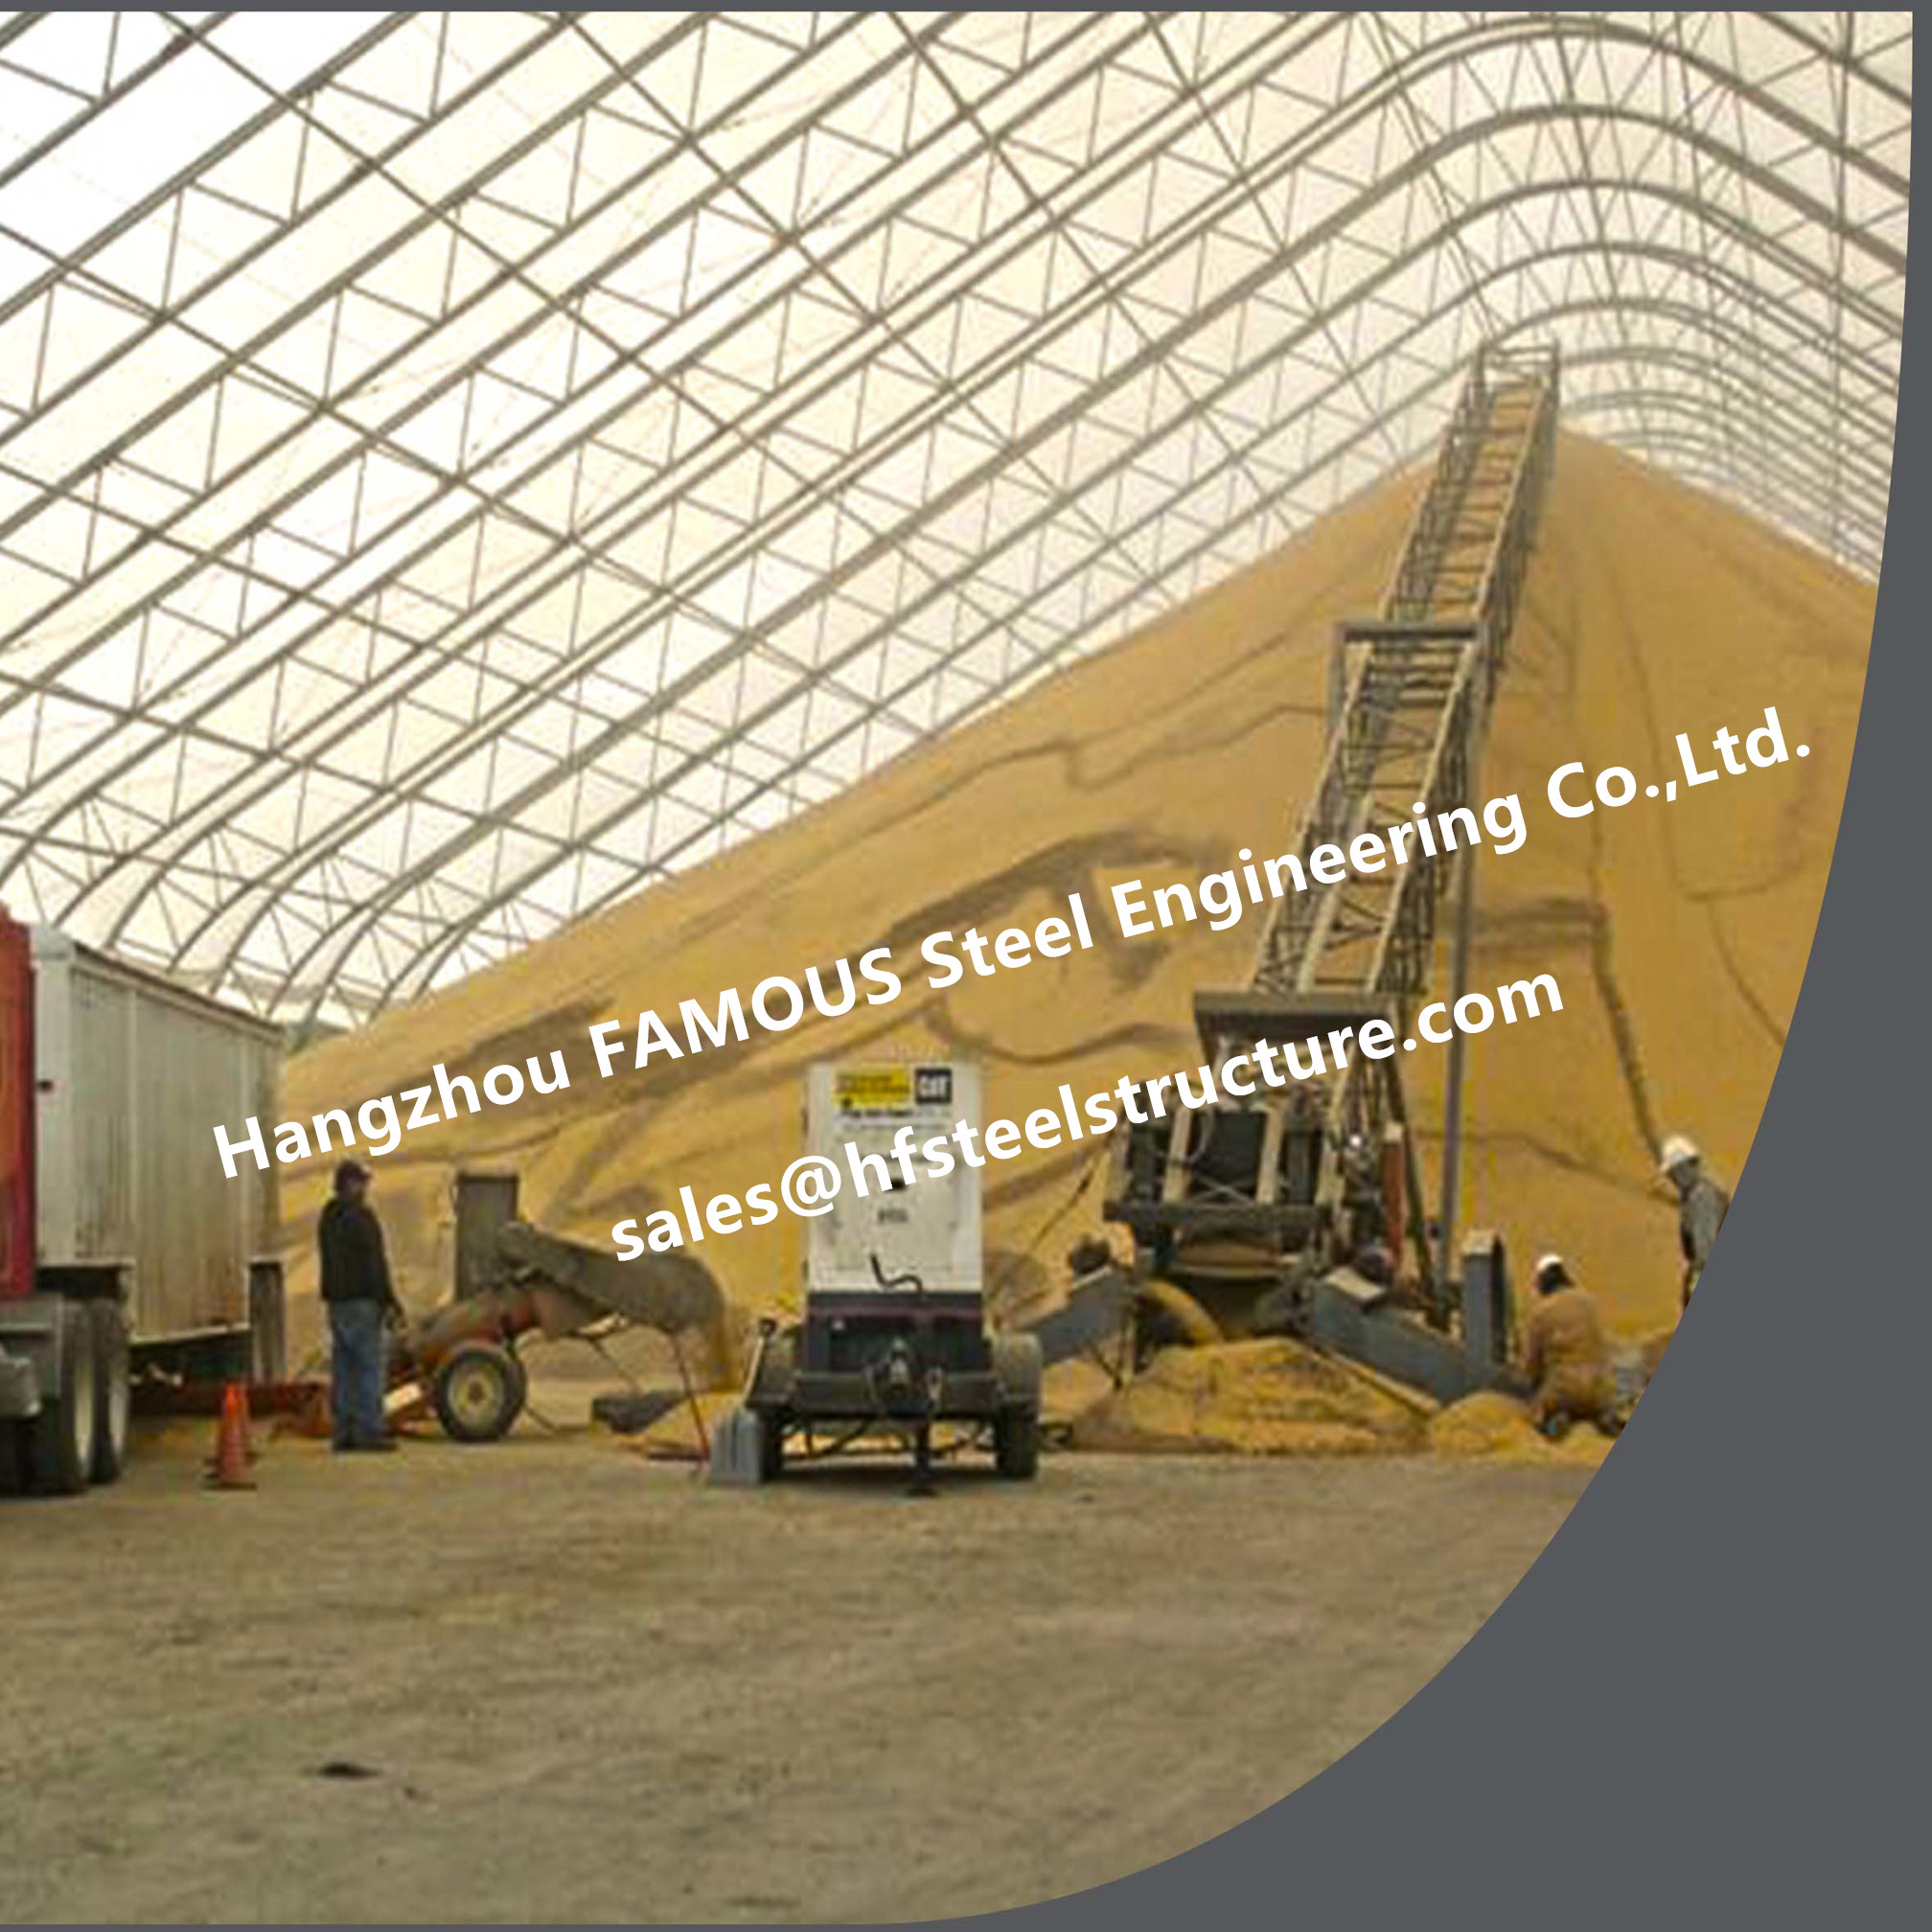 Roofing Steel Mill In China Walk In Chiller - High Space Steel Framed Warehouse Buildings With Arch Roof For Barn Storage And Poultry Shed – FAMOUS